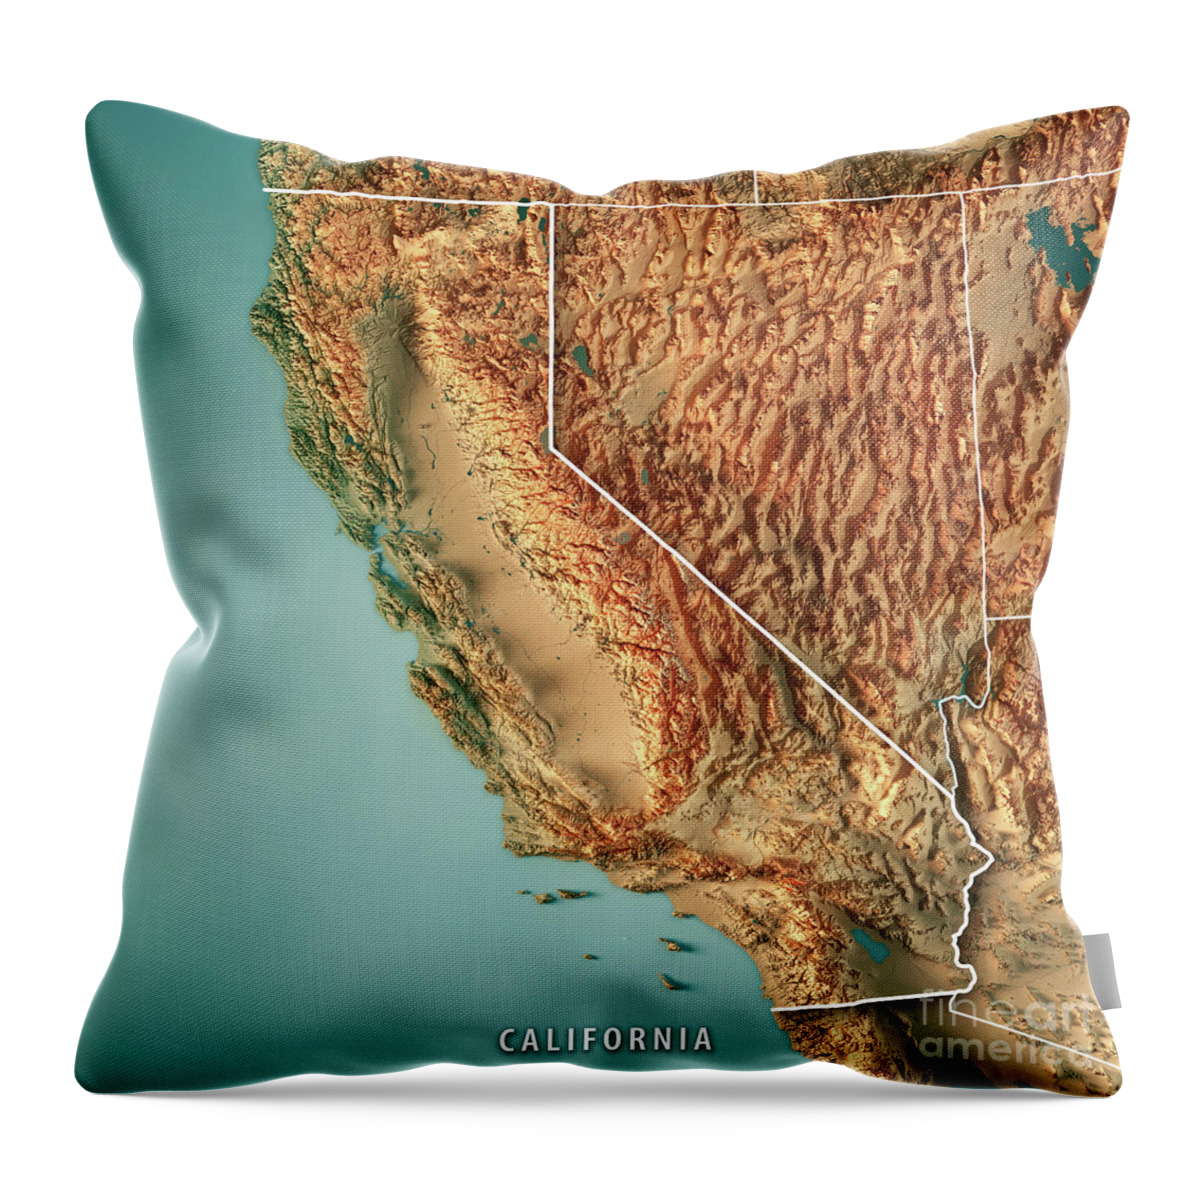 California Throw Pillow featuring the digital art California State USA 3D Render Topographic Map Border by Frank Ramspott